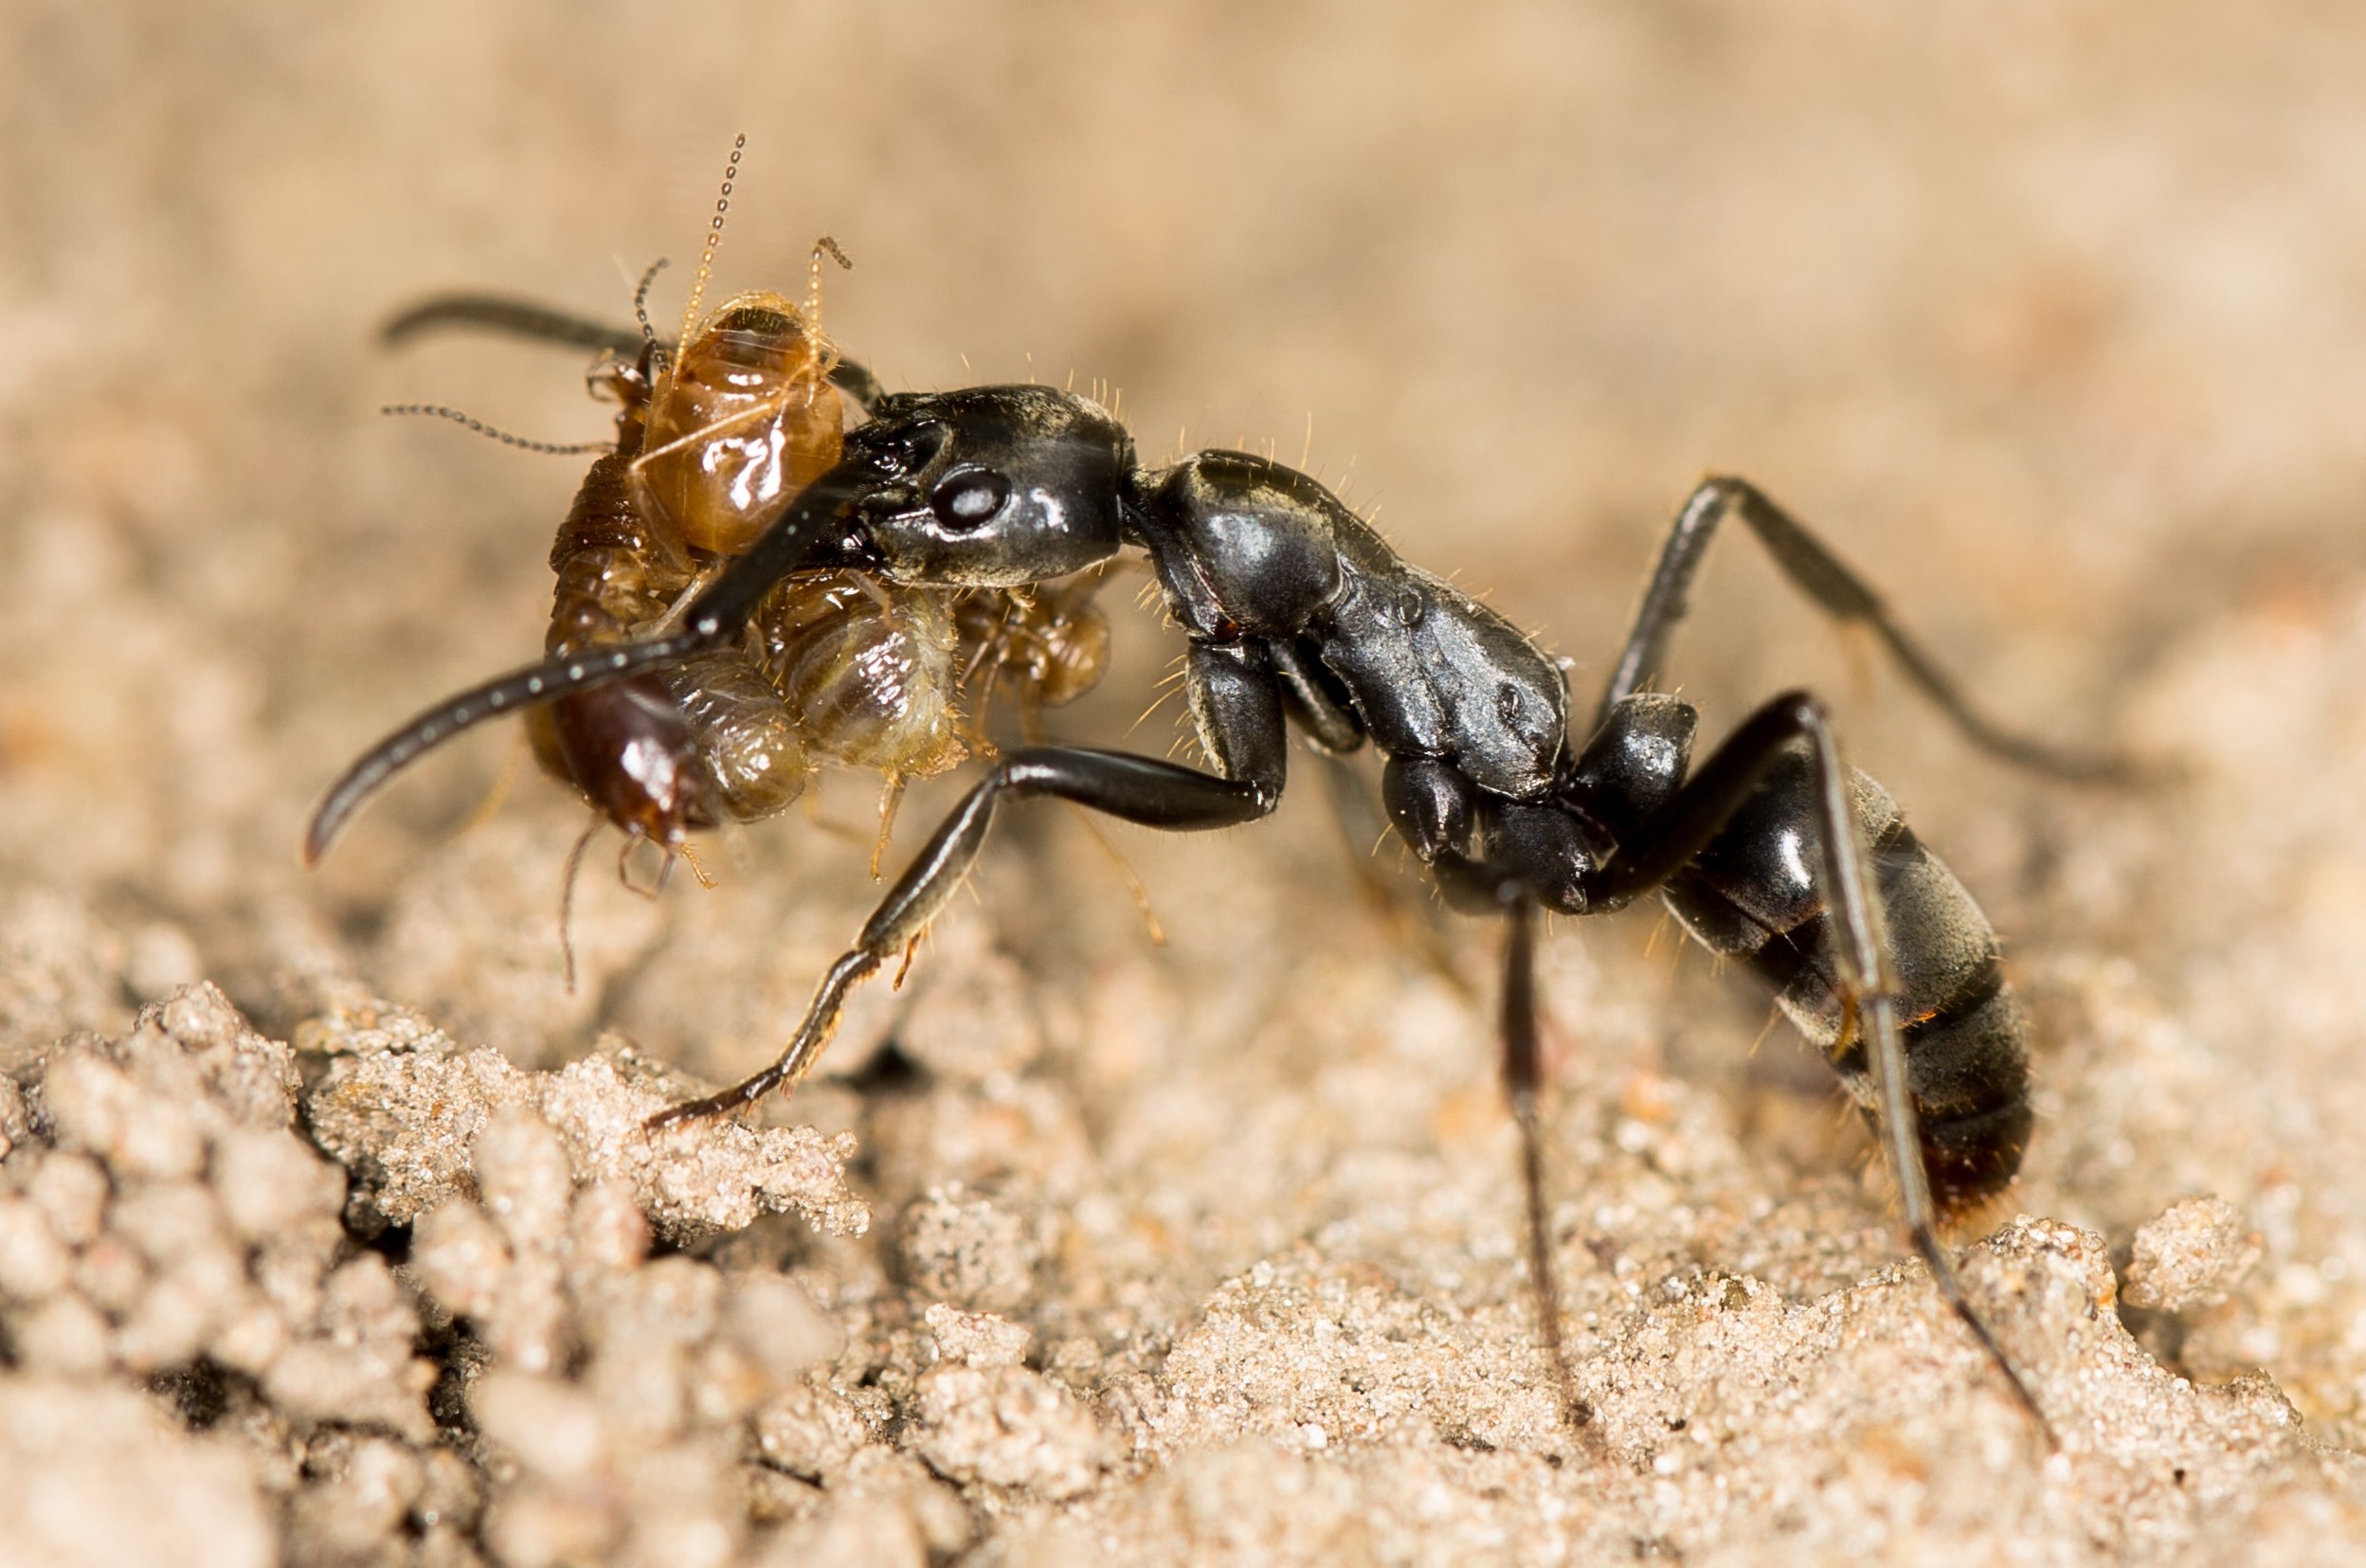 An ant and a termite